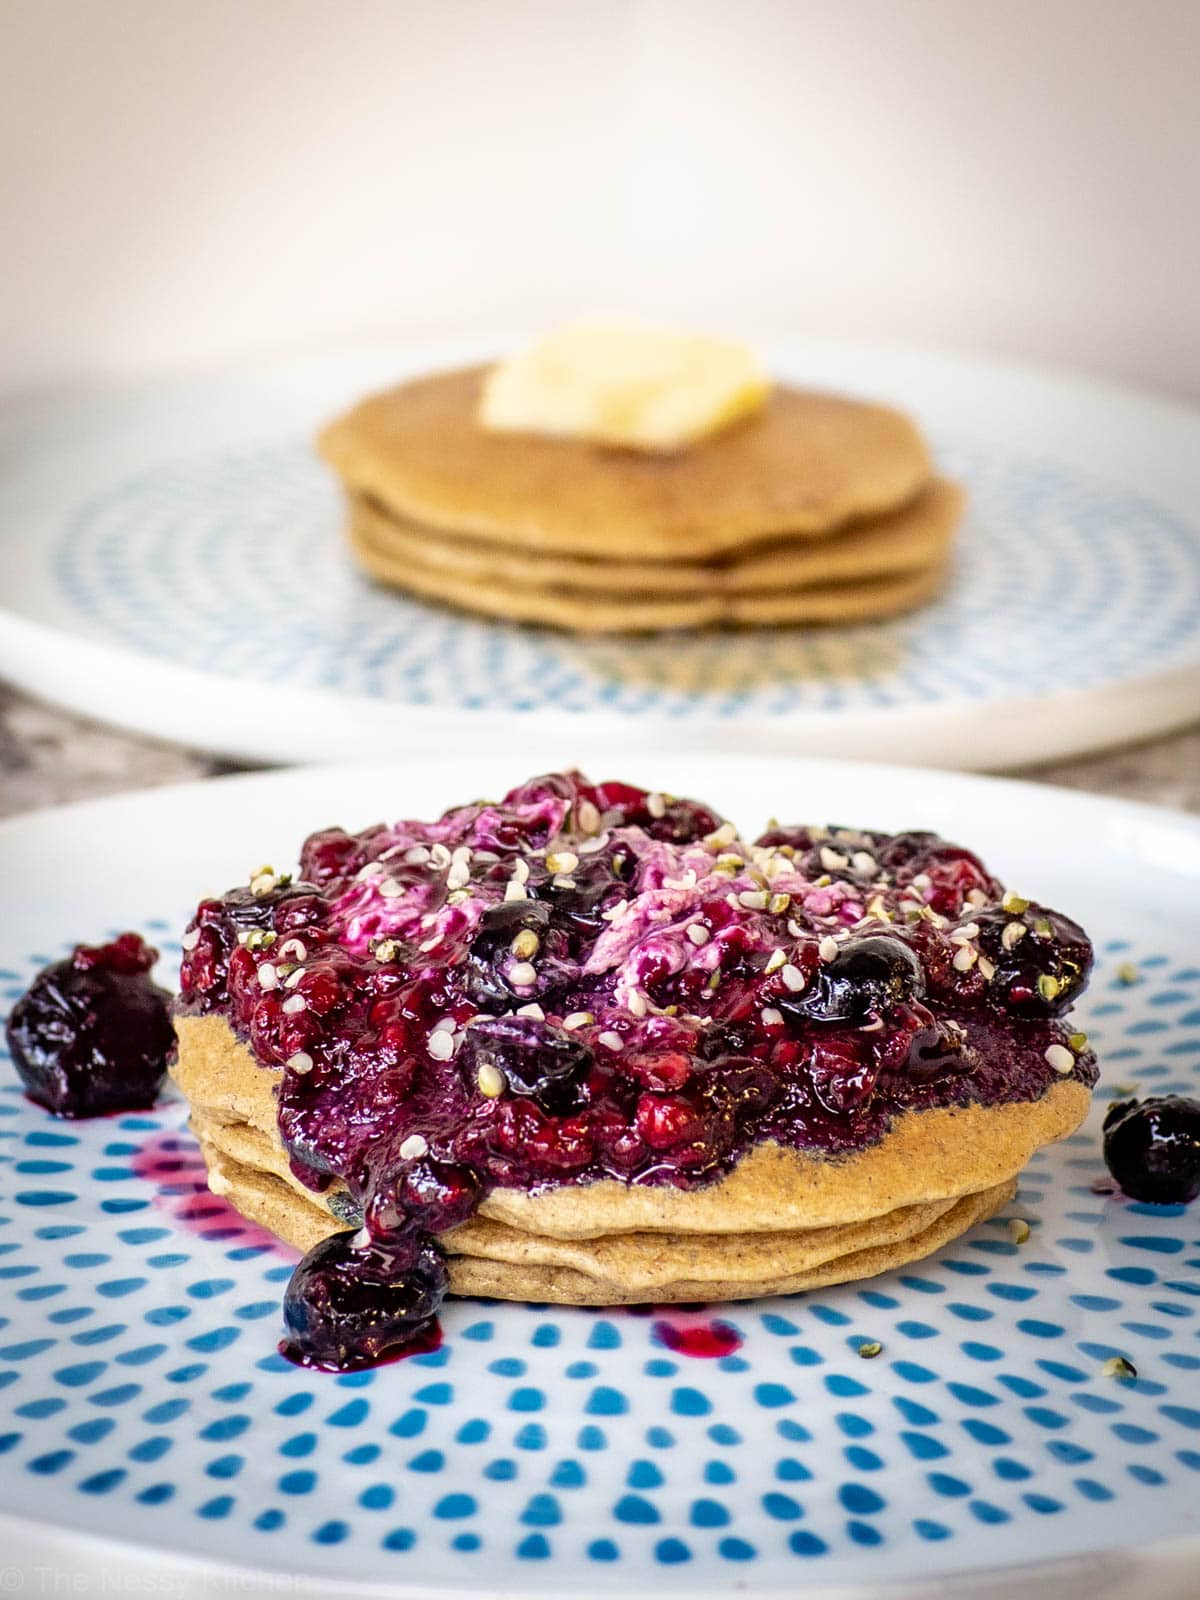 Plate of pancakes topped with yogurt, berries and hemp seeds.